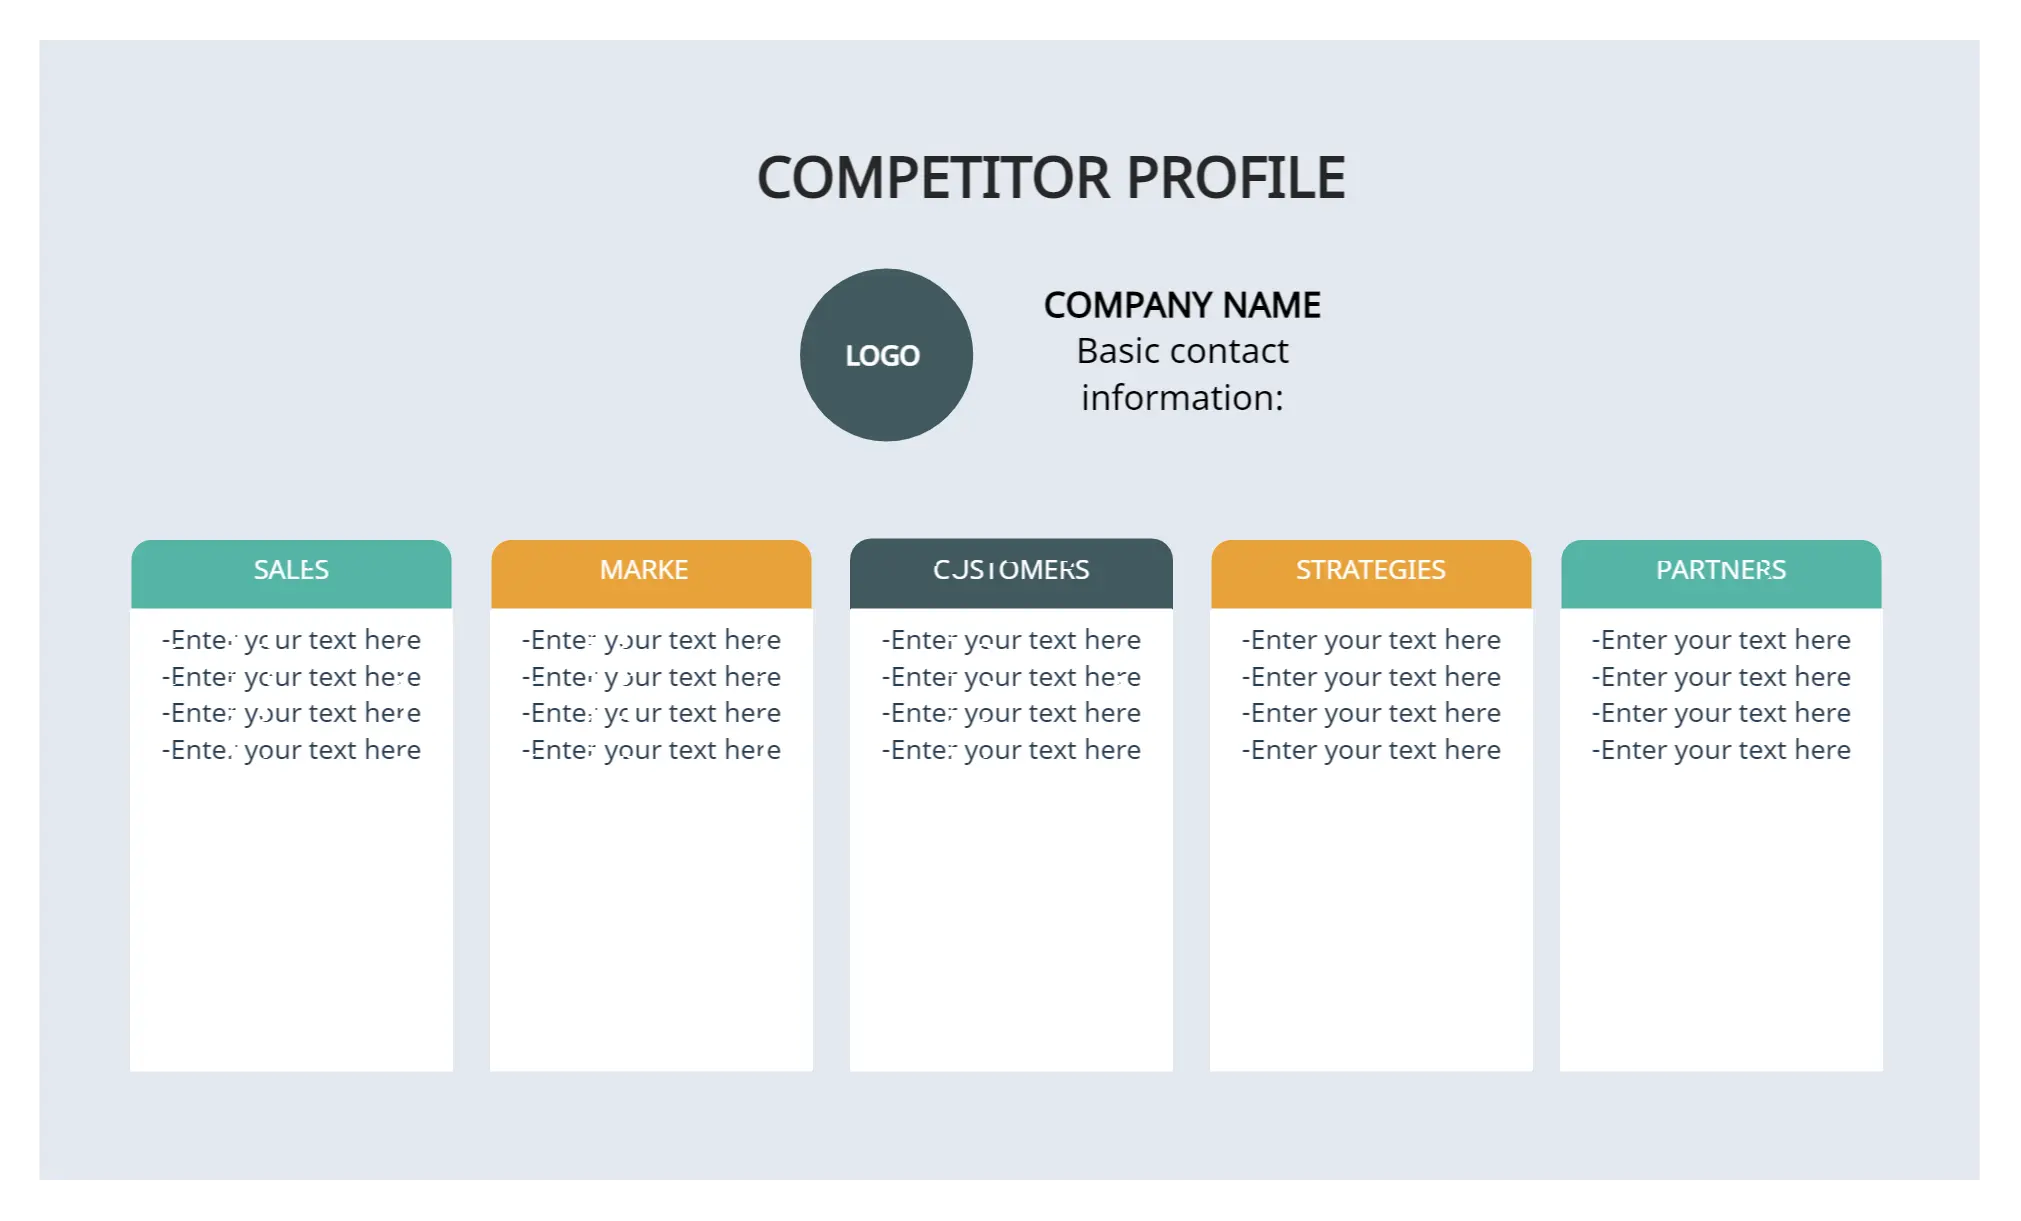 Competitor Profile Template for Business Plan